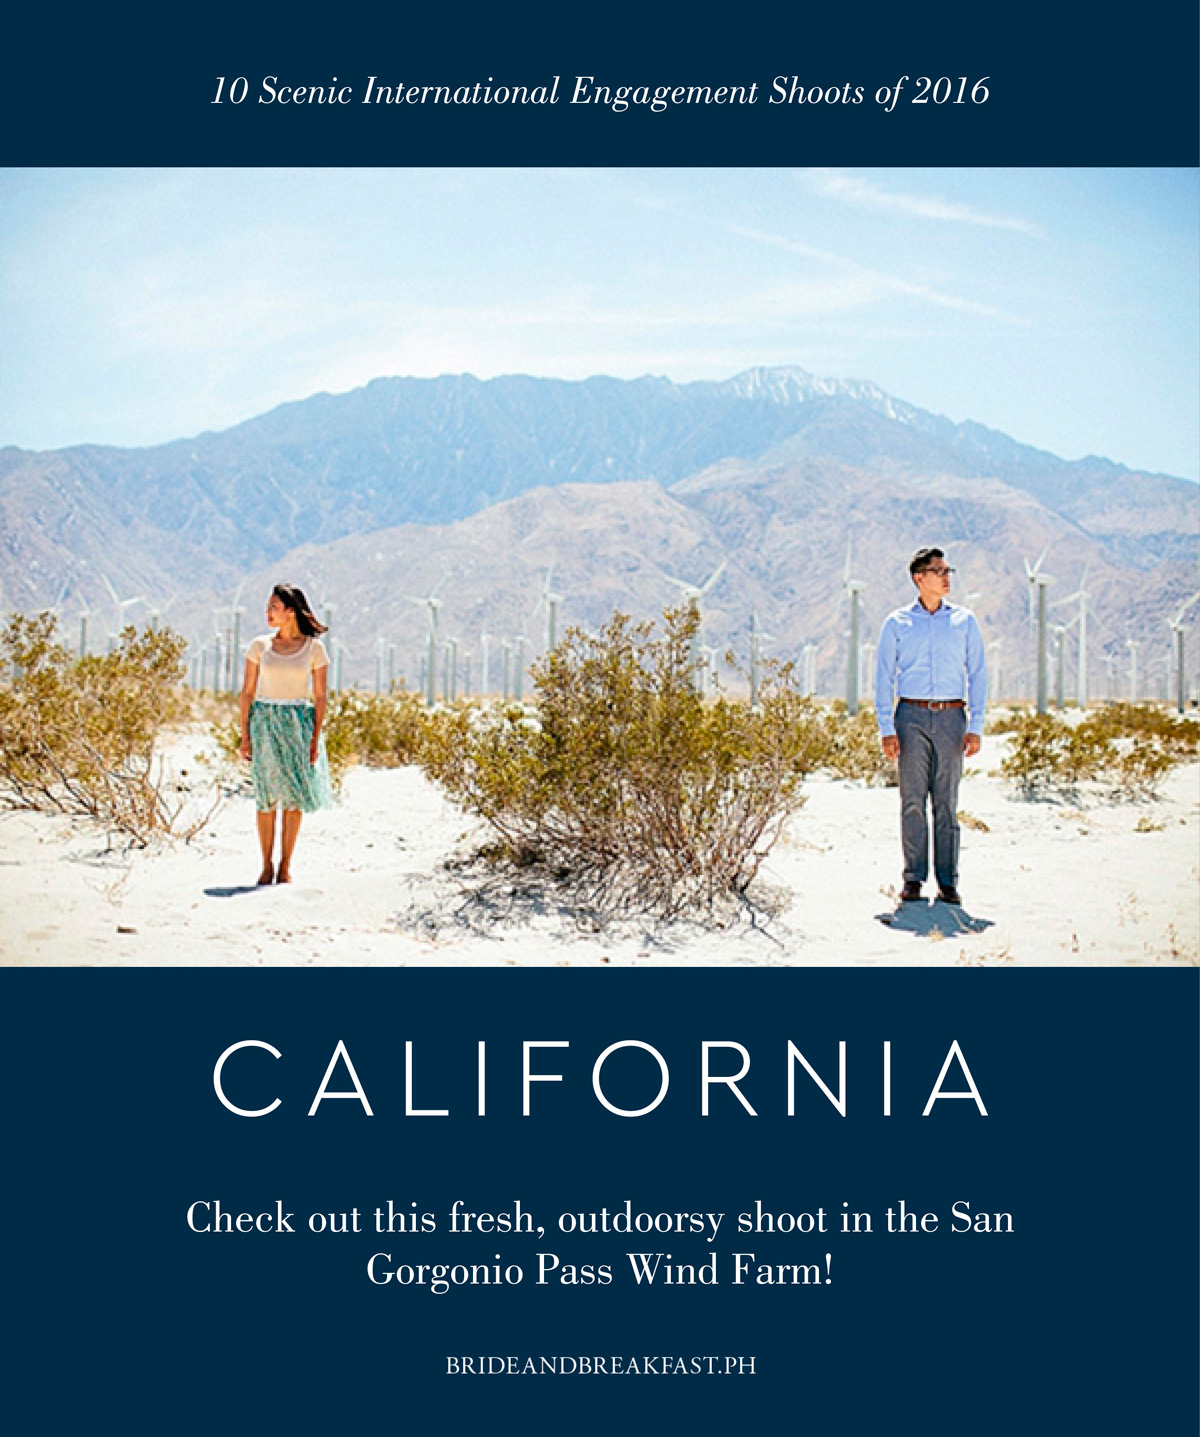 10. California Check out this fresh, outdoorsy shoot in the San Gorgonio Pass Wind Farm!